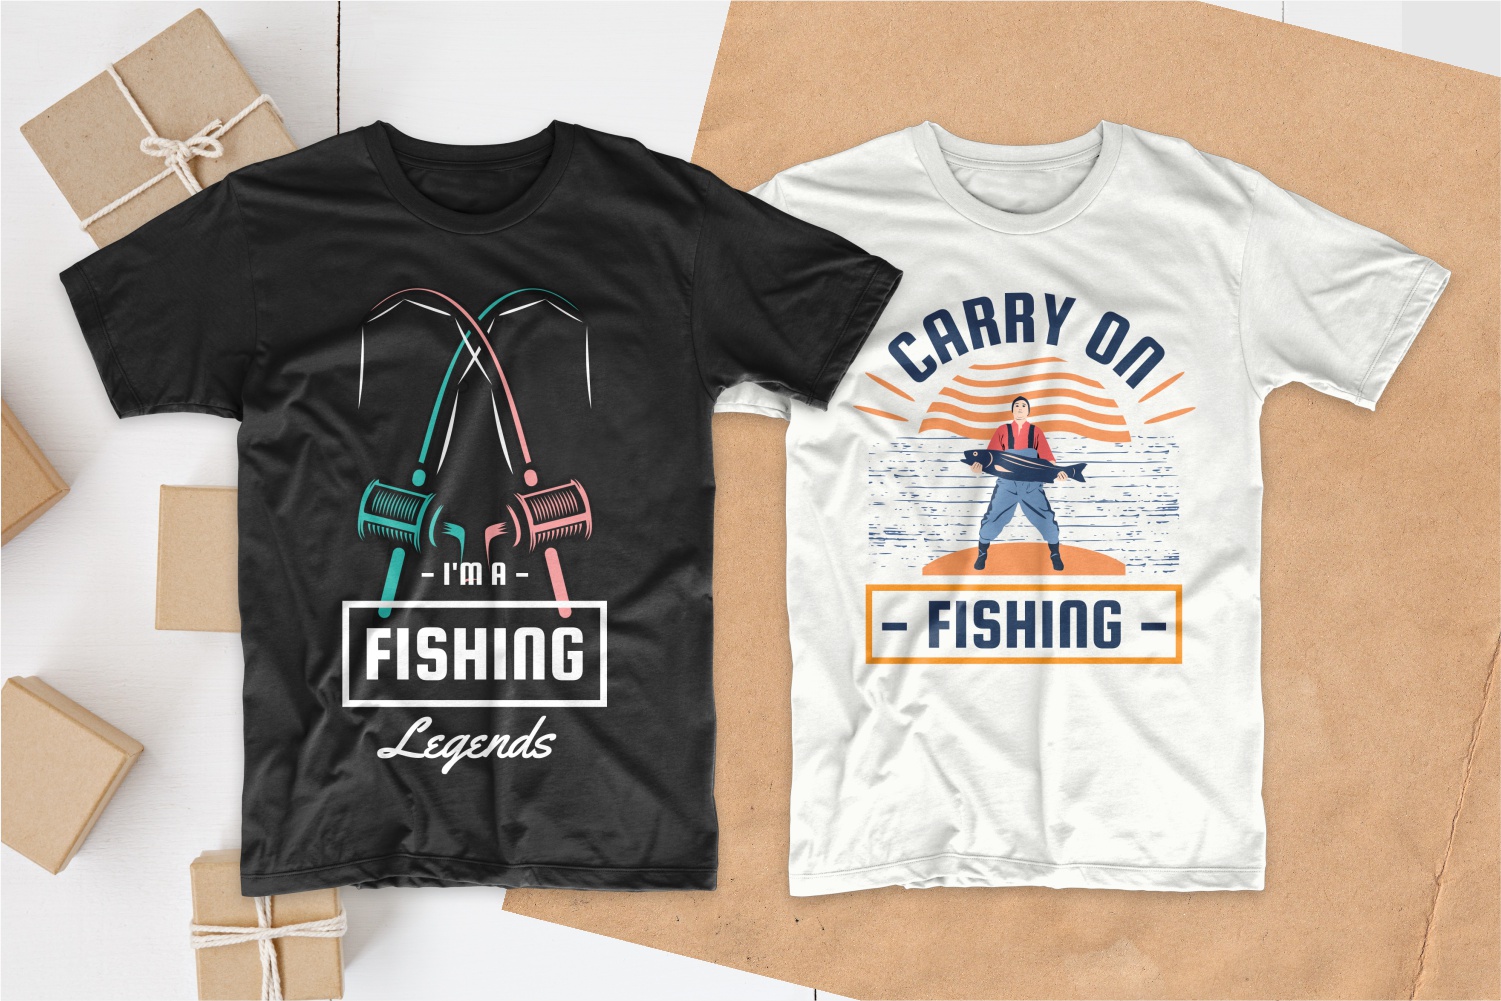 White and black T-shirts with pictures of fishing accessories.